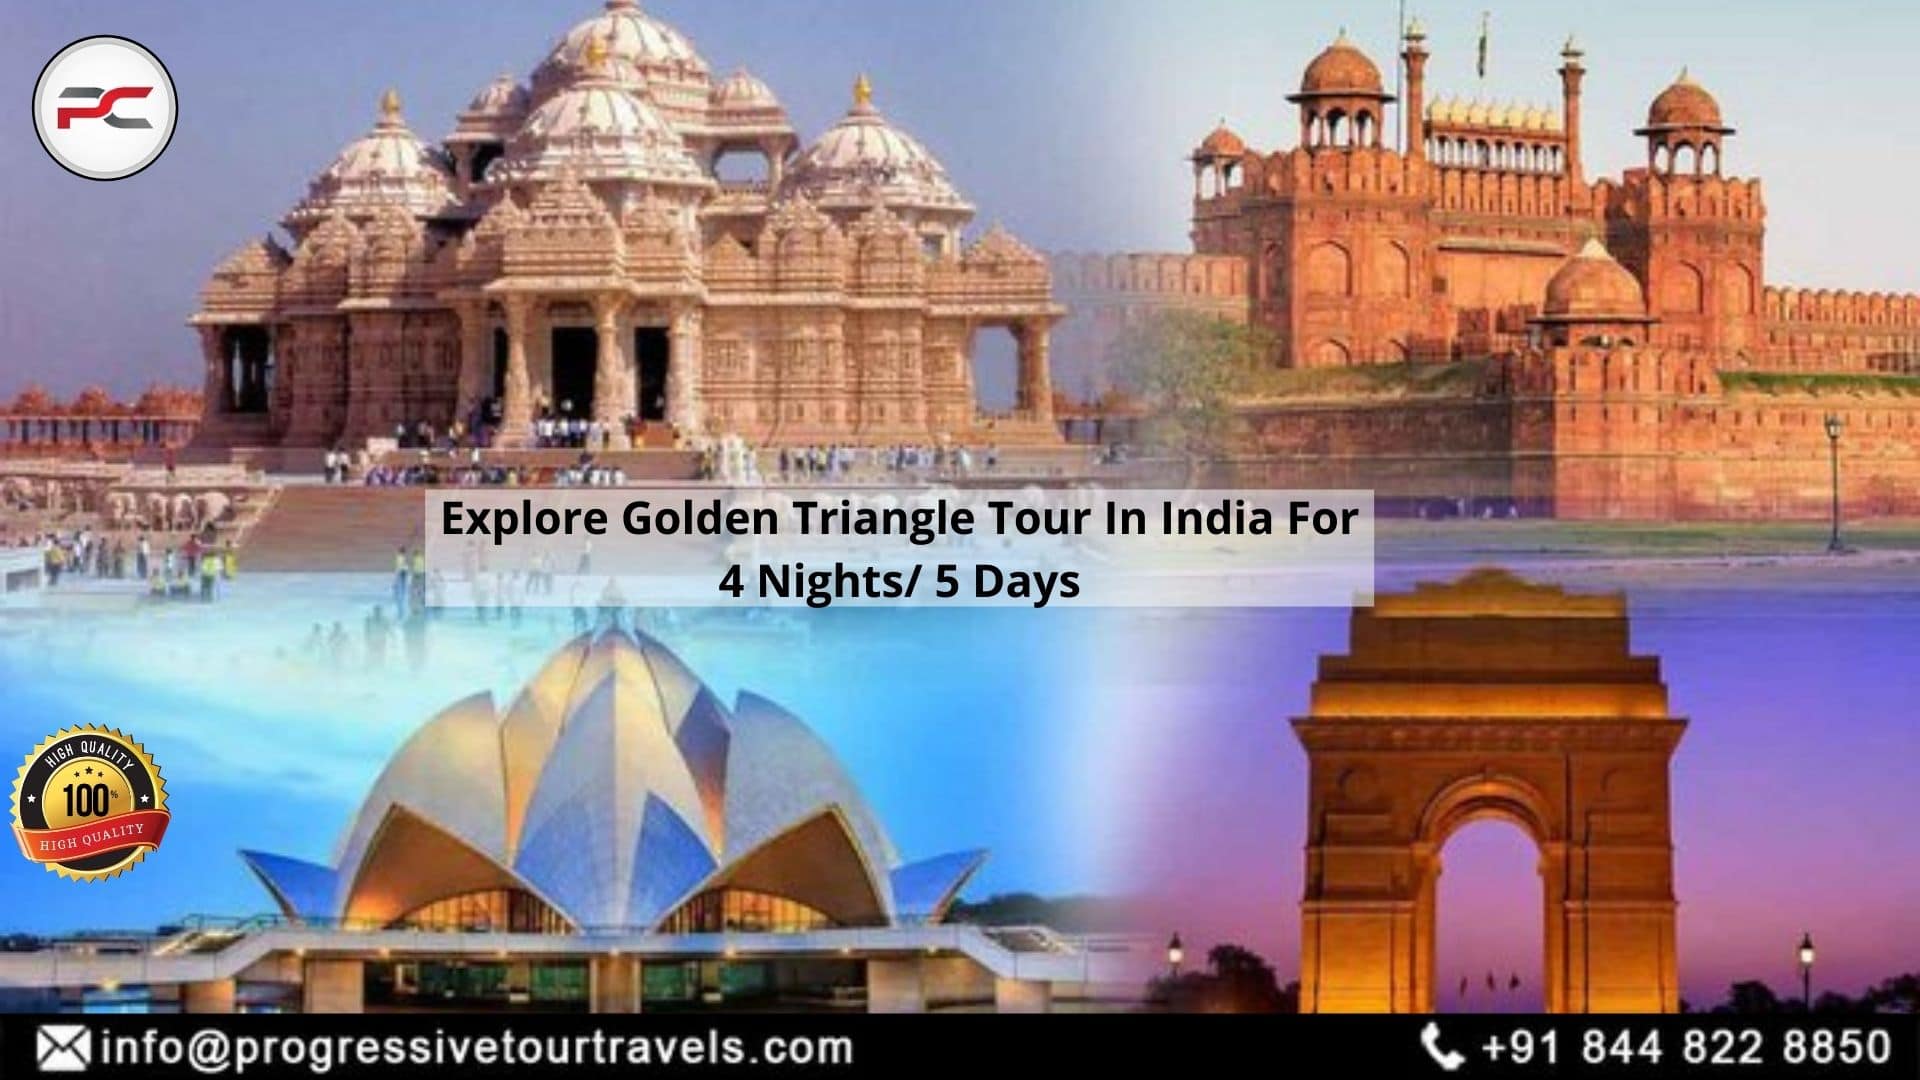 Explore Golden Triangle Tour In India For 4 Nights 5 Days-dfe4dcb6